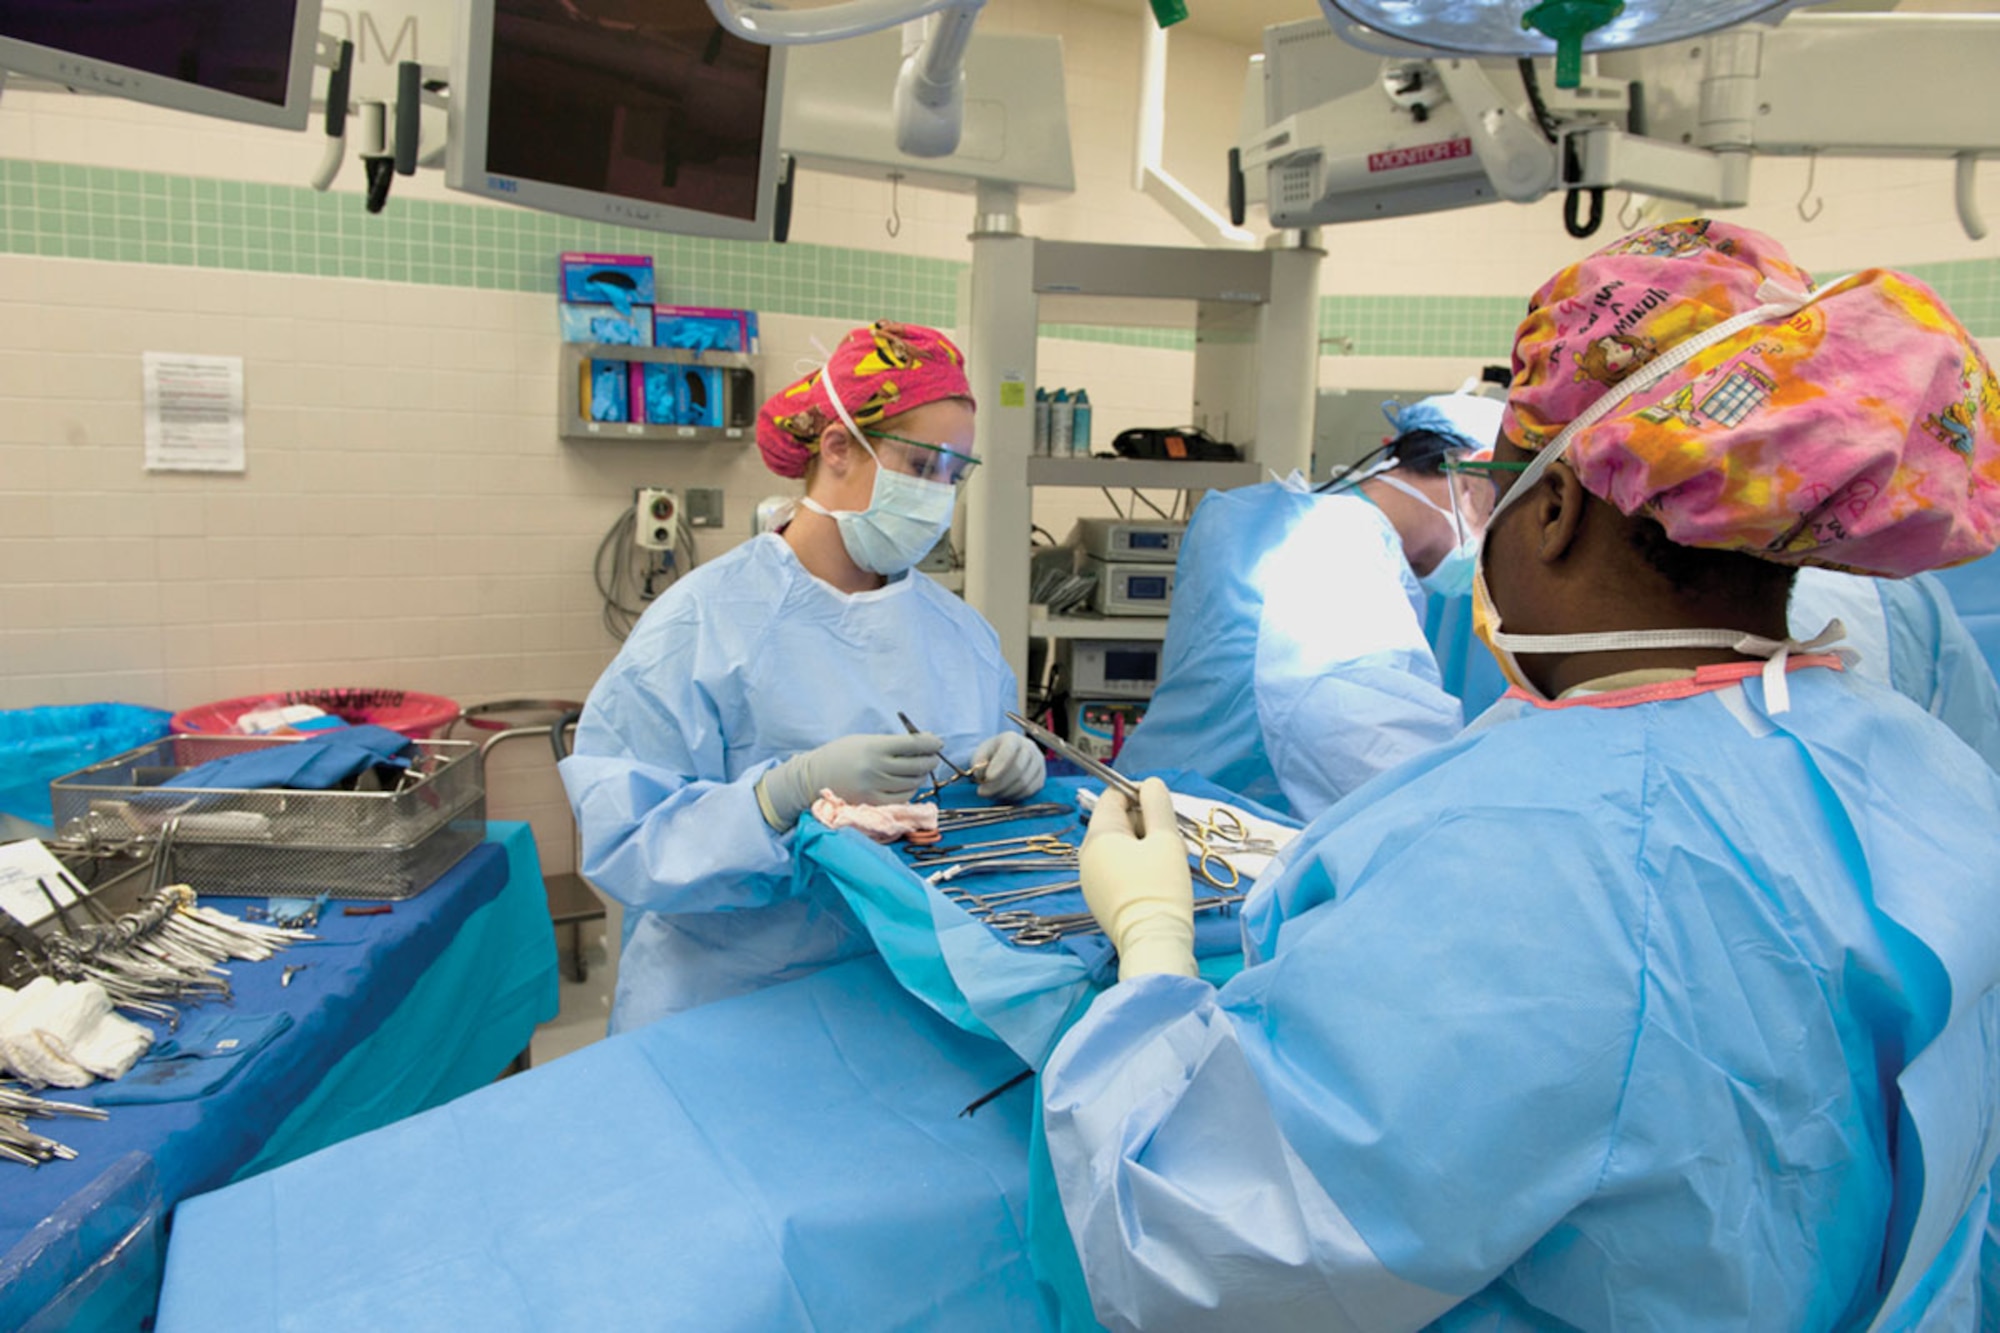 Surgical technicians with the 673d Medical Support Squadron work in an operating room of the JBER hospital.  (U.S. Air Force Photo/ Airman 1st Class Omari Bernard)